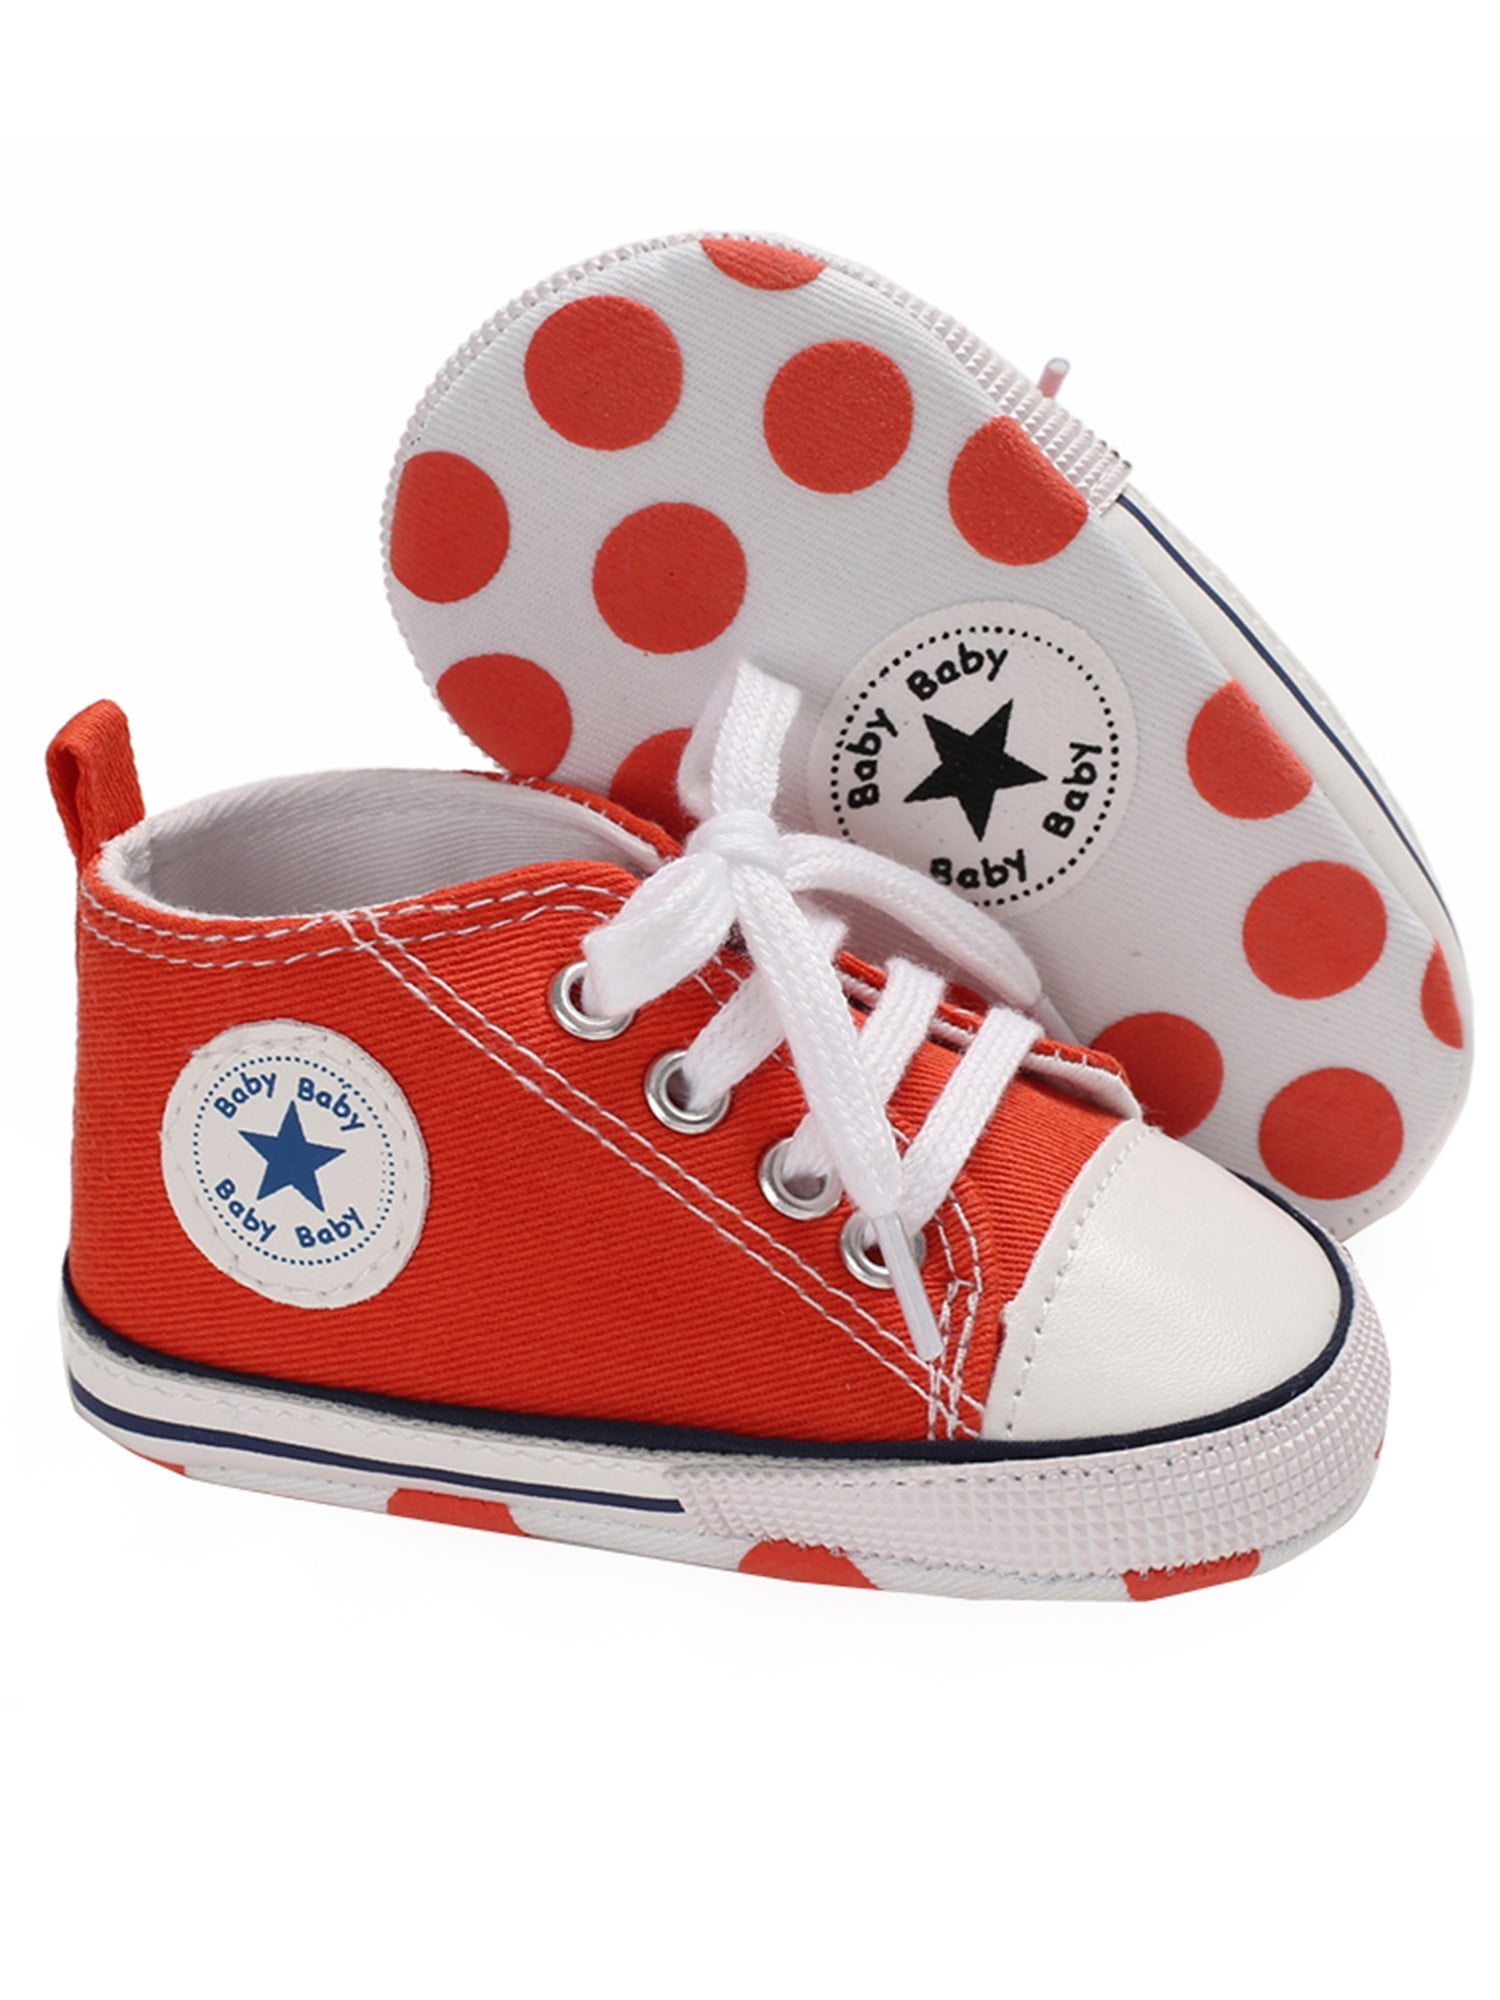 Unisex Baby Boys Girls Canvas Sneakers Soft Sole High-Top Ankle Infant Crib Shoes Toddler First Walkers